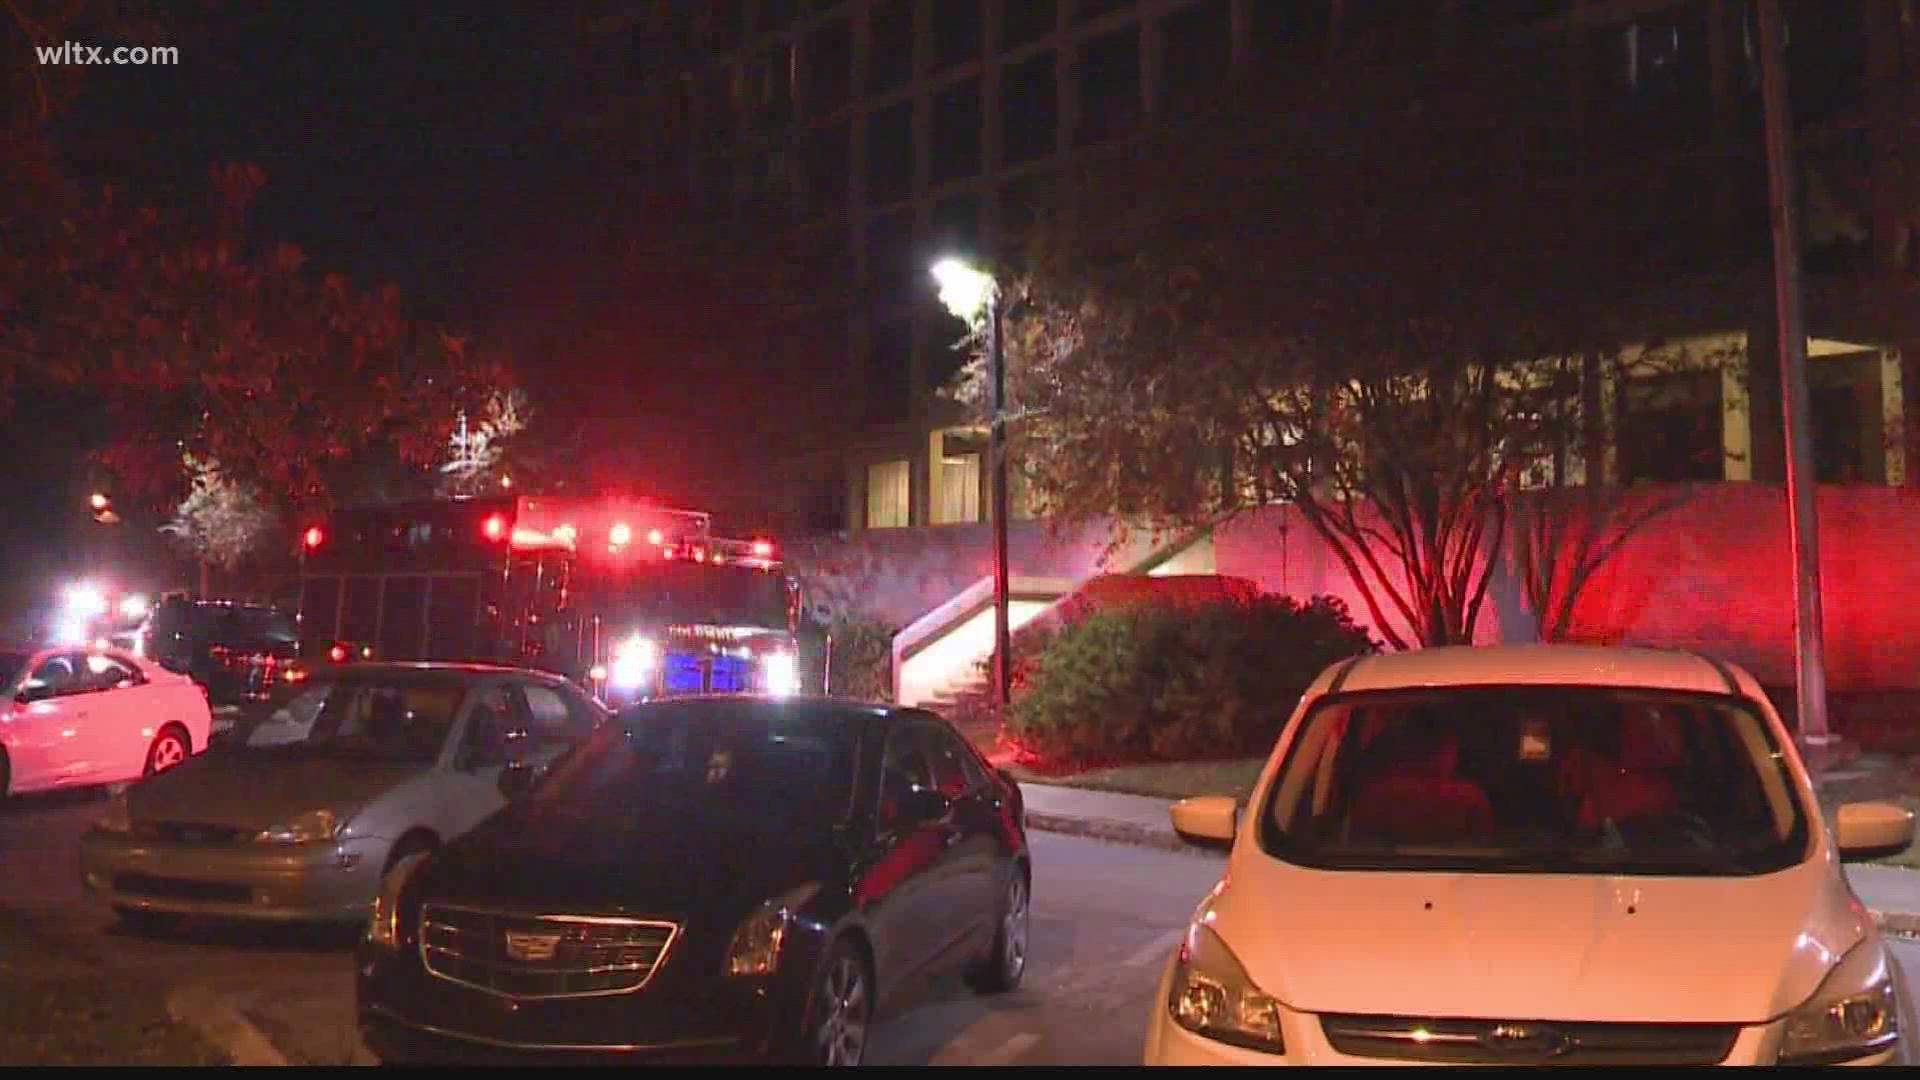 Blaze began around 5 p.m. Sunday at Christopher Towers, leaving minimal damage but flooding and power outage due to sprinkler system